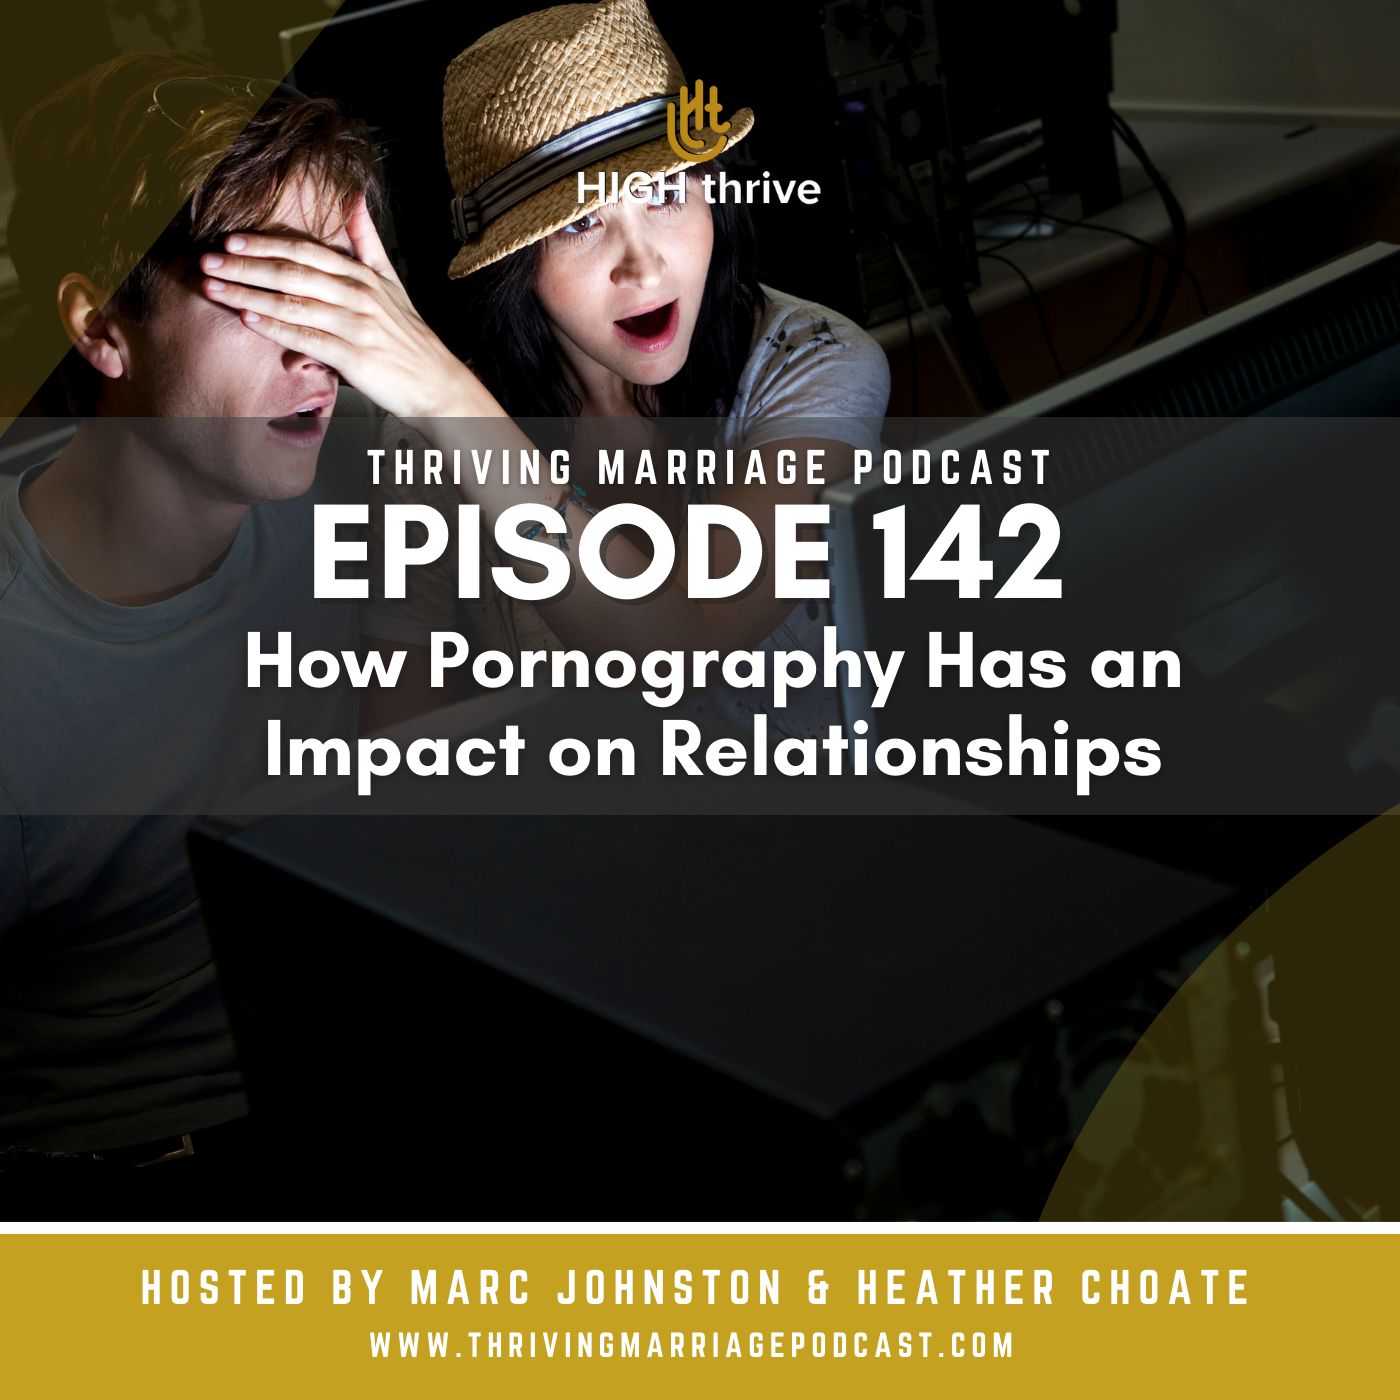 Episode 142: How Pornography Has an Impact on Relationships